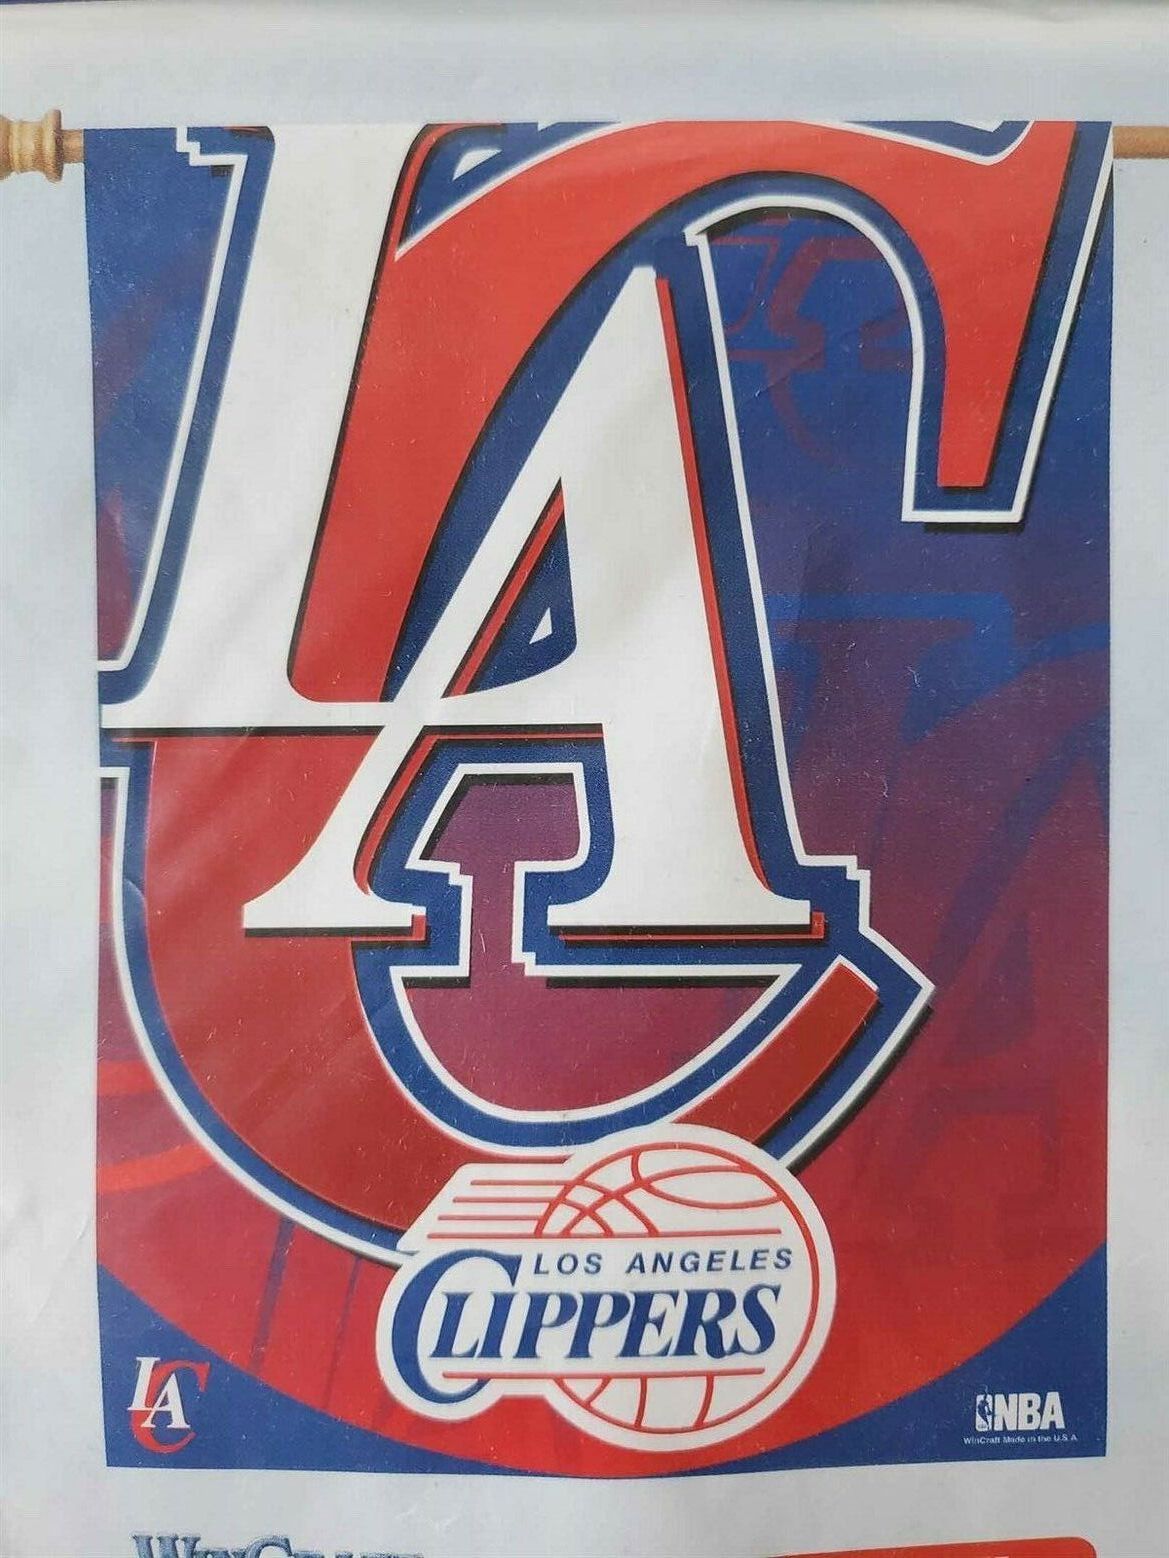 Los Angeles Clippers NBA 27" x 37" Vertical Flag